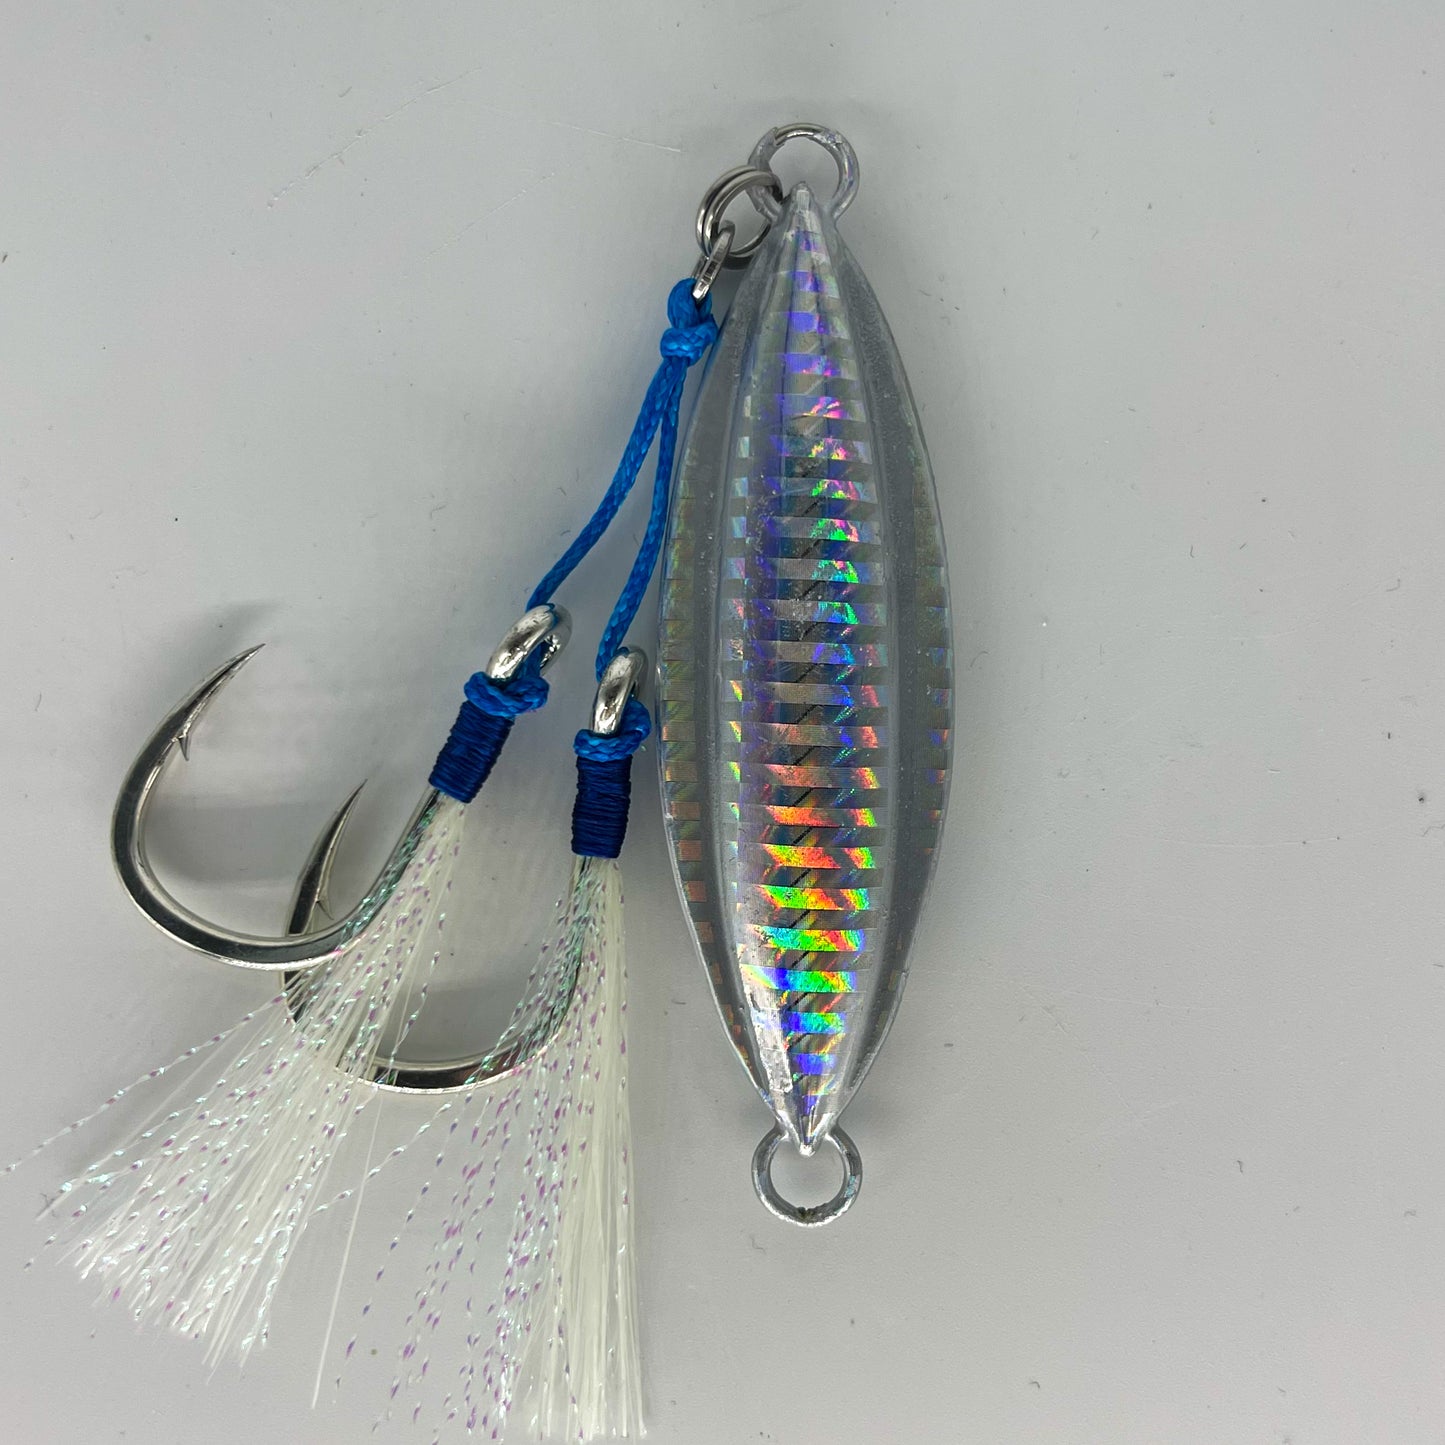 Slow Pitch Metal 'Nugget' Fishing Jig Pre Rigged